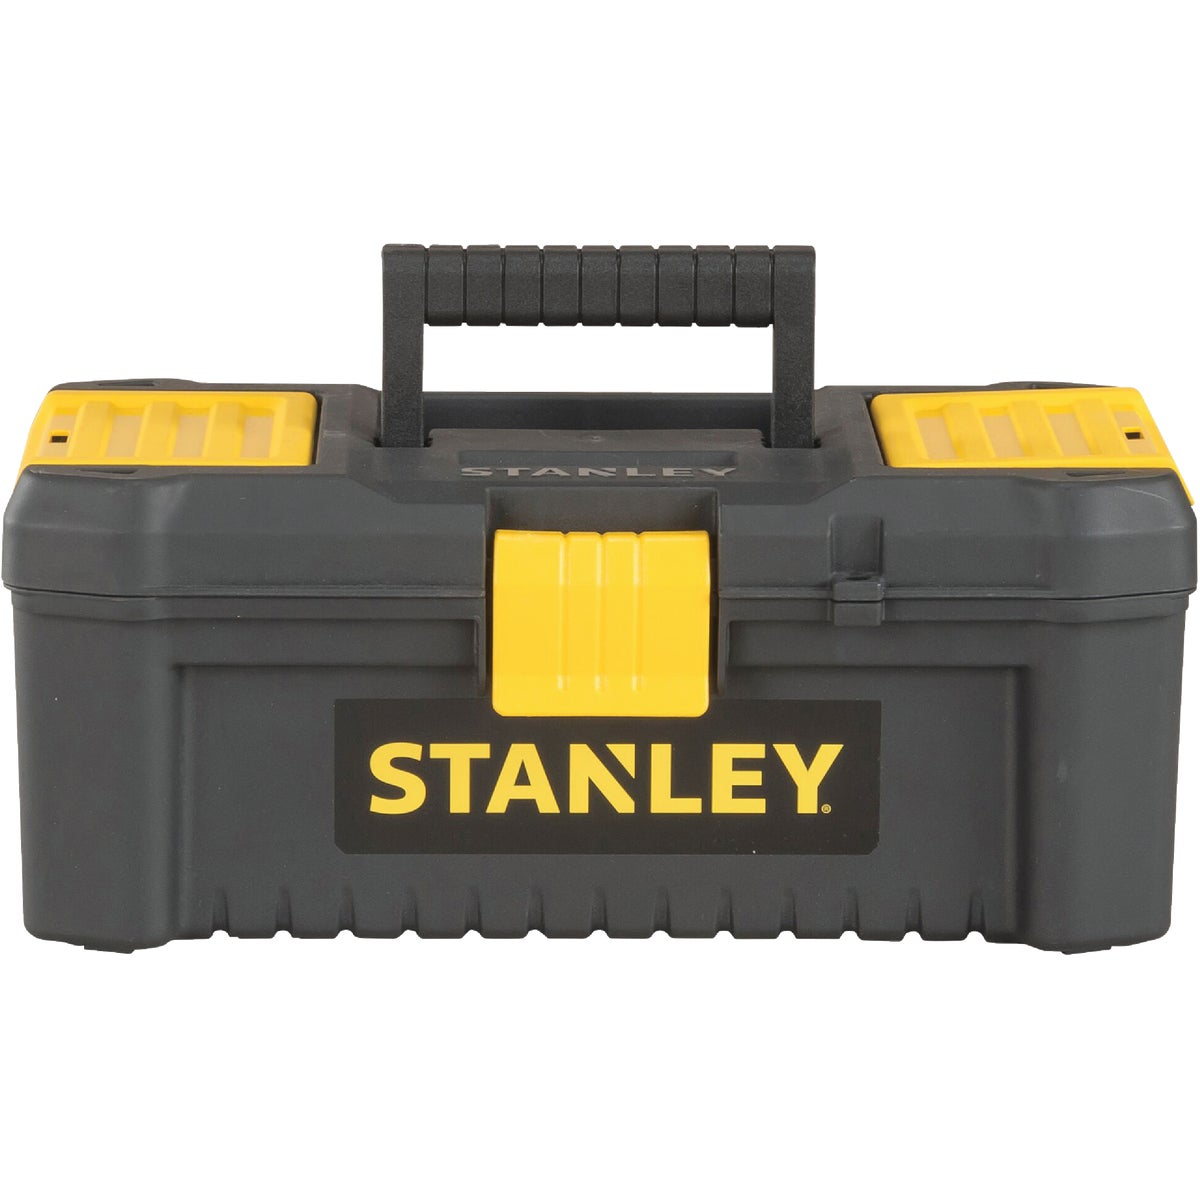 Item 311529, The Stanley Essential Toolbox is newly redesigned and engineered to satisfy